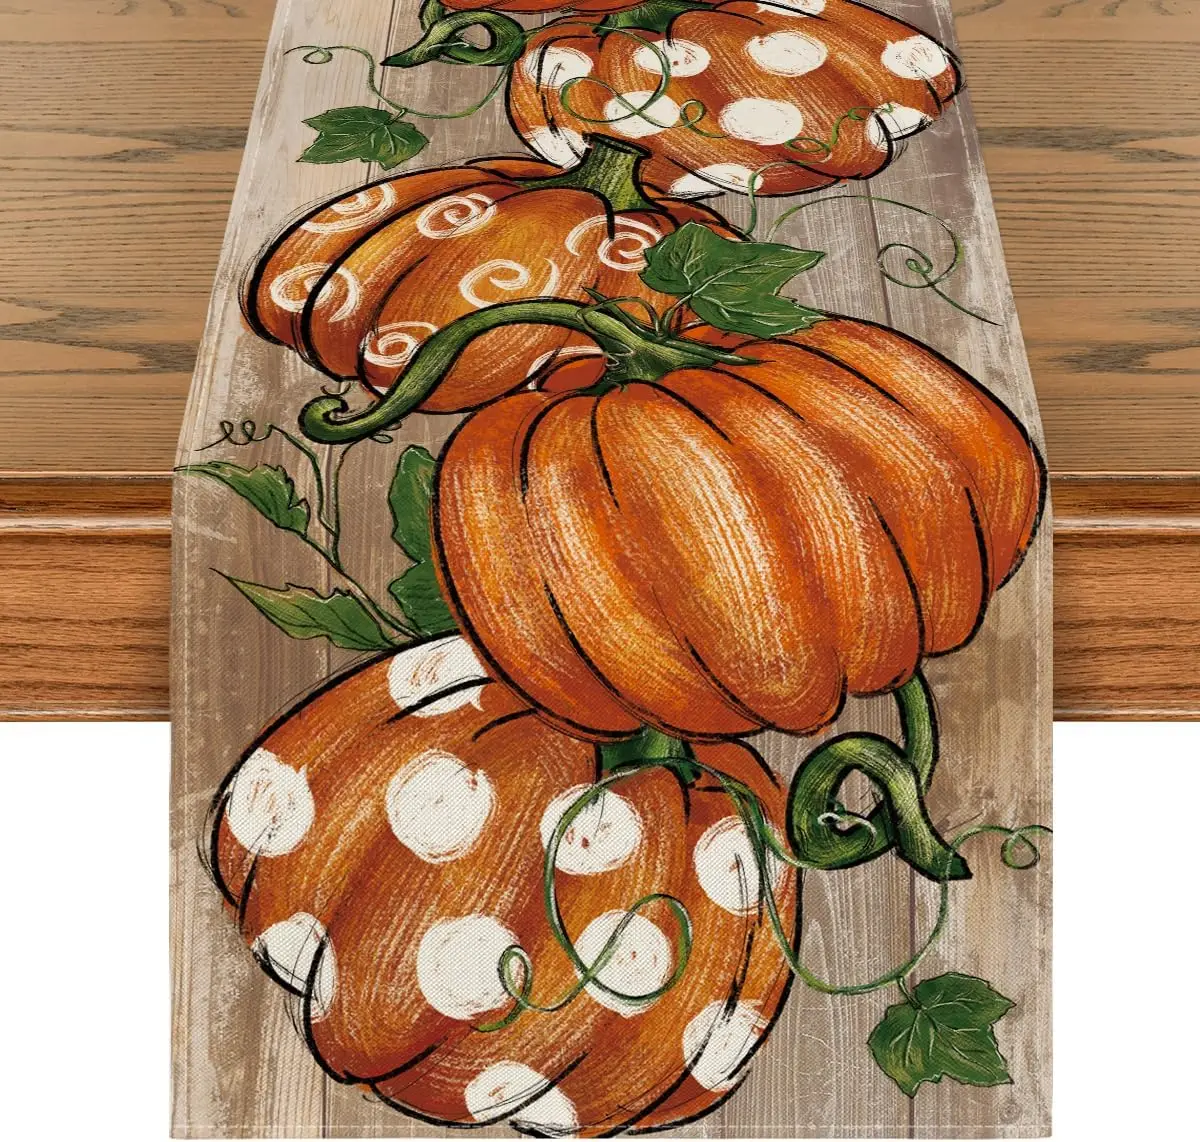 

Polka Dot Pumpkins Vine Fall Table Runner Seasonal Autumn Thanksgiving Kitchen Dining Tablecloth Decoration for Home Party Decor